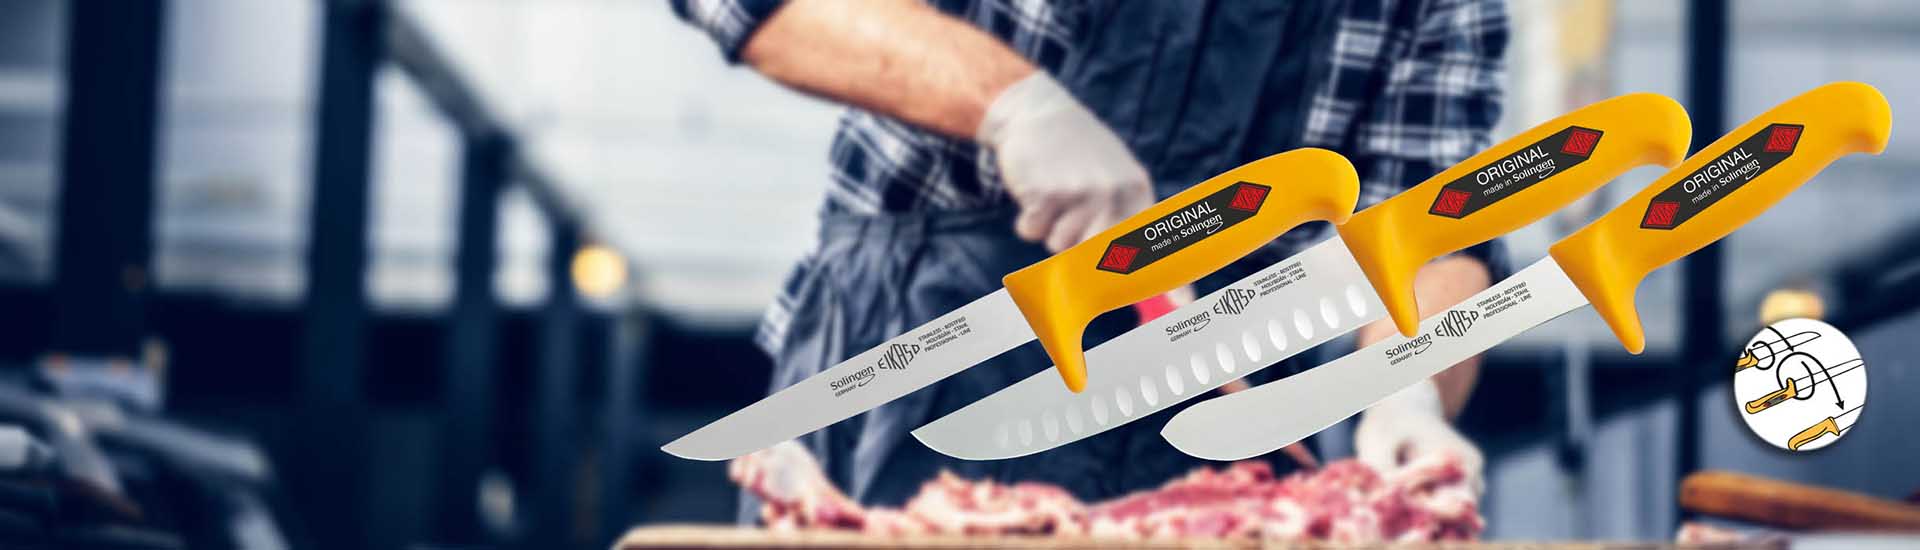 Eikaso Meat Knives and Butcher Knives with 'Profitect' Safety Handle - Quality for Professional Demands